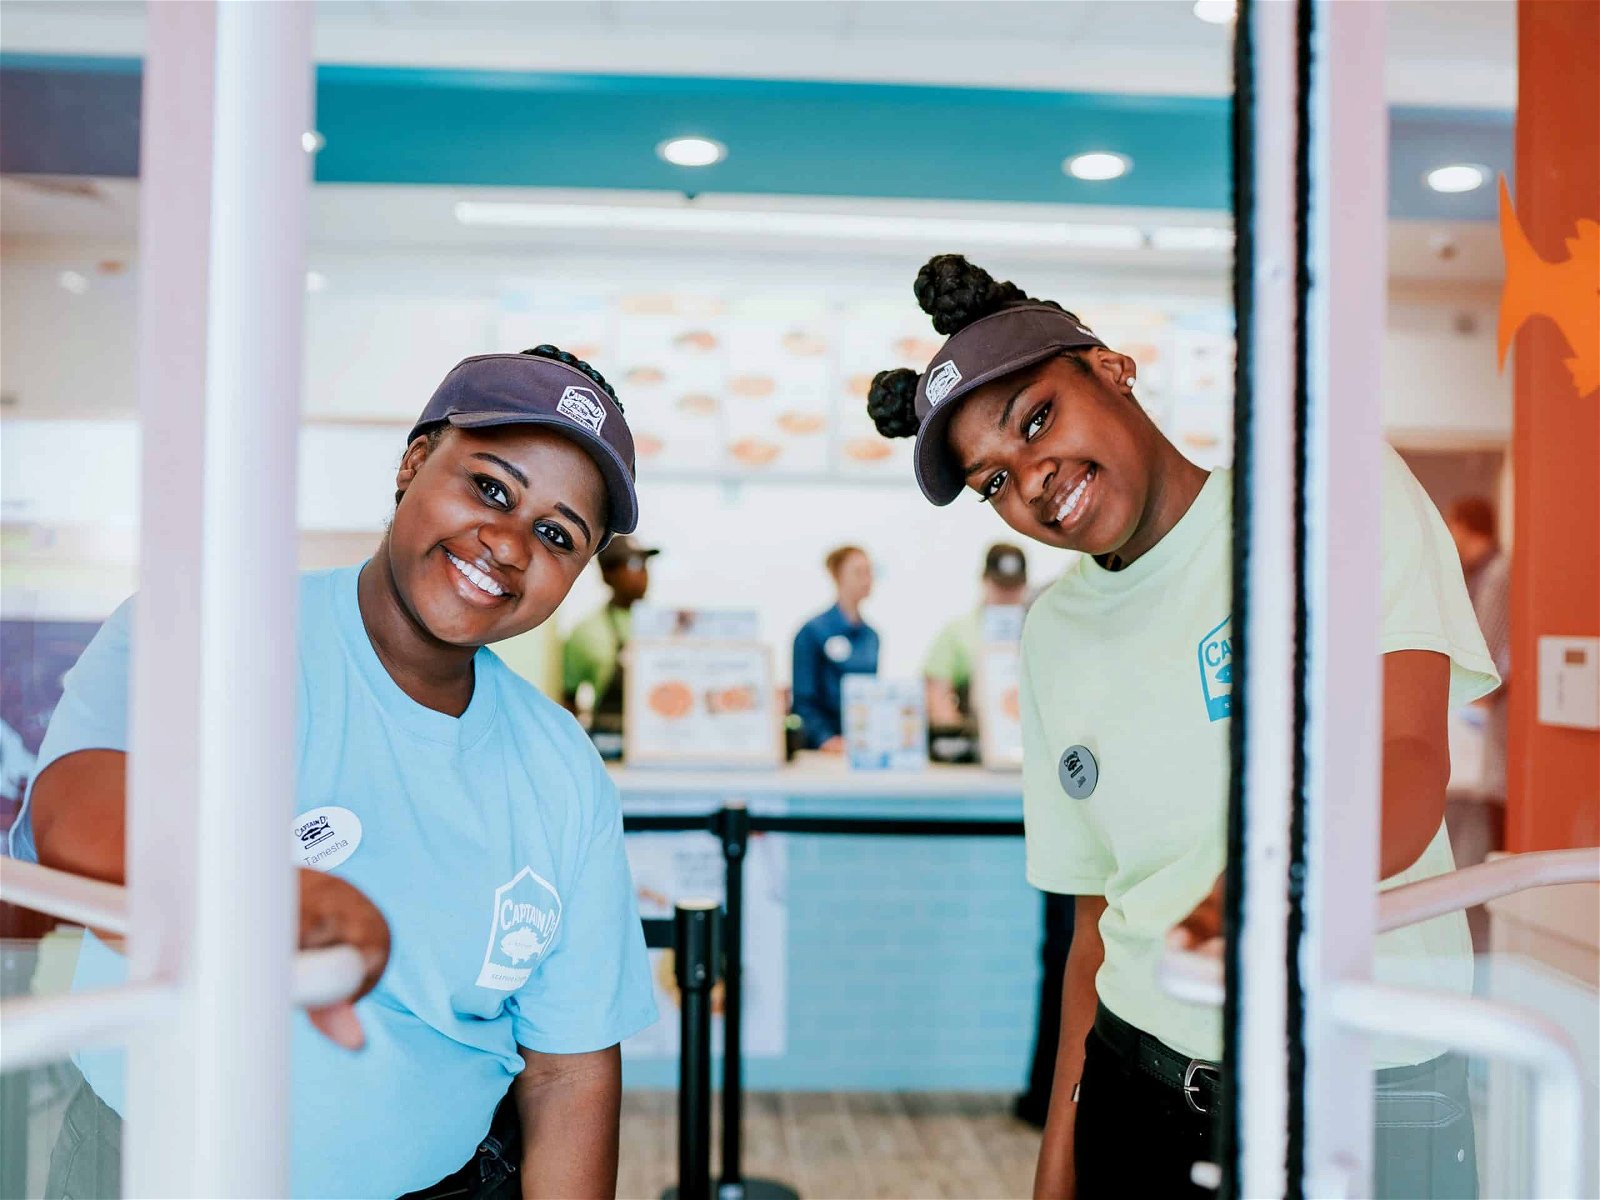 Two smiling employees in blue uniforms standing behind a counter in a brightly colored fast-food restaurant, one is opening the door for the viewer.